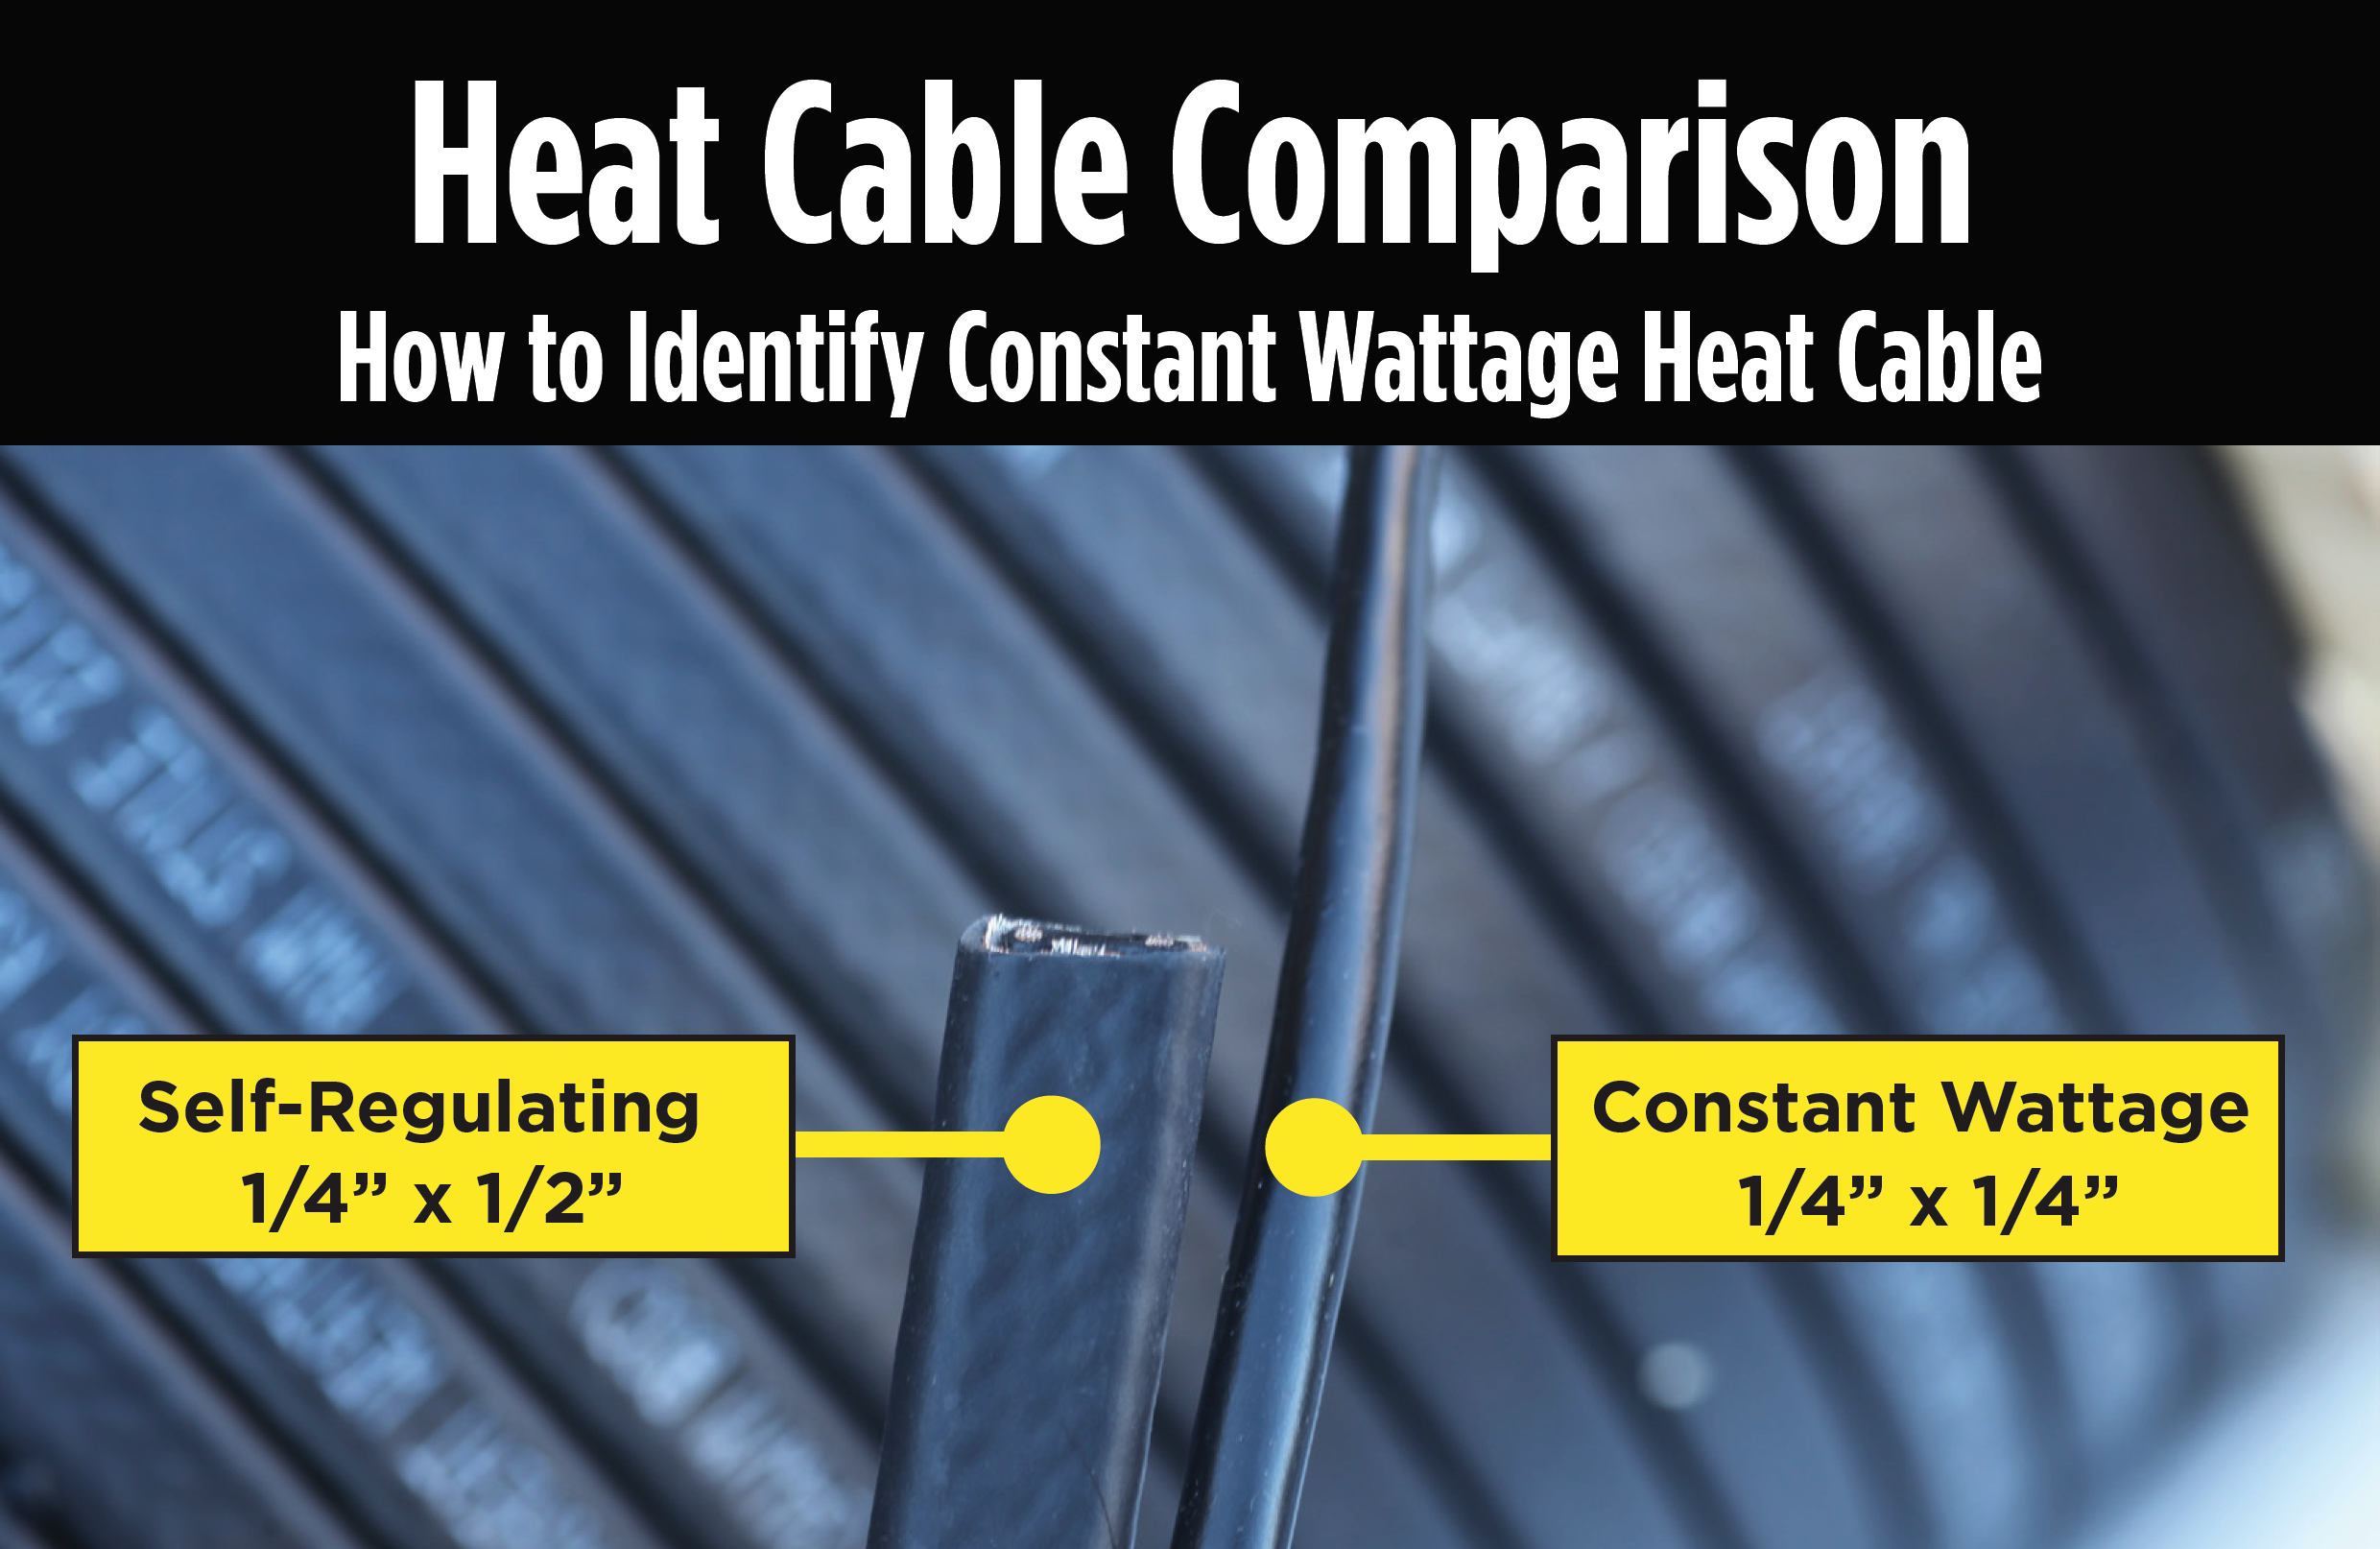 Not all heat cable is created equal